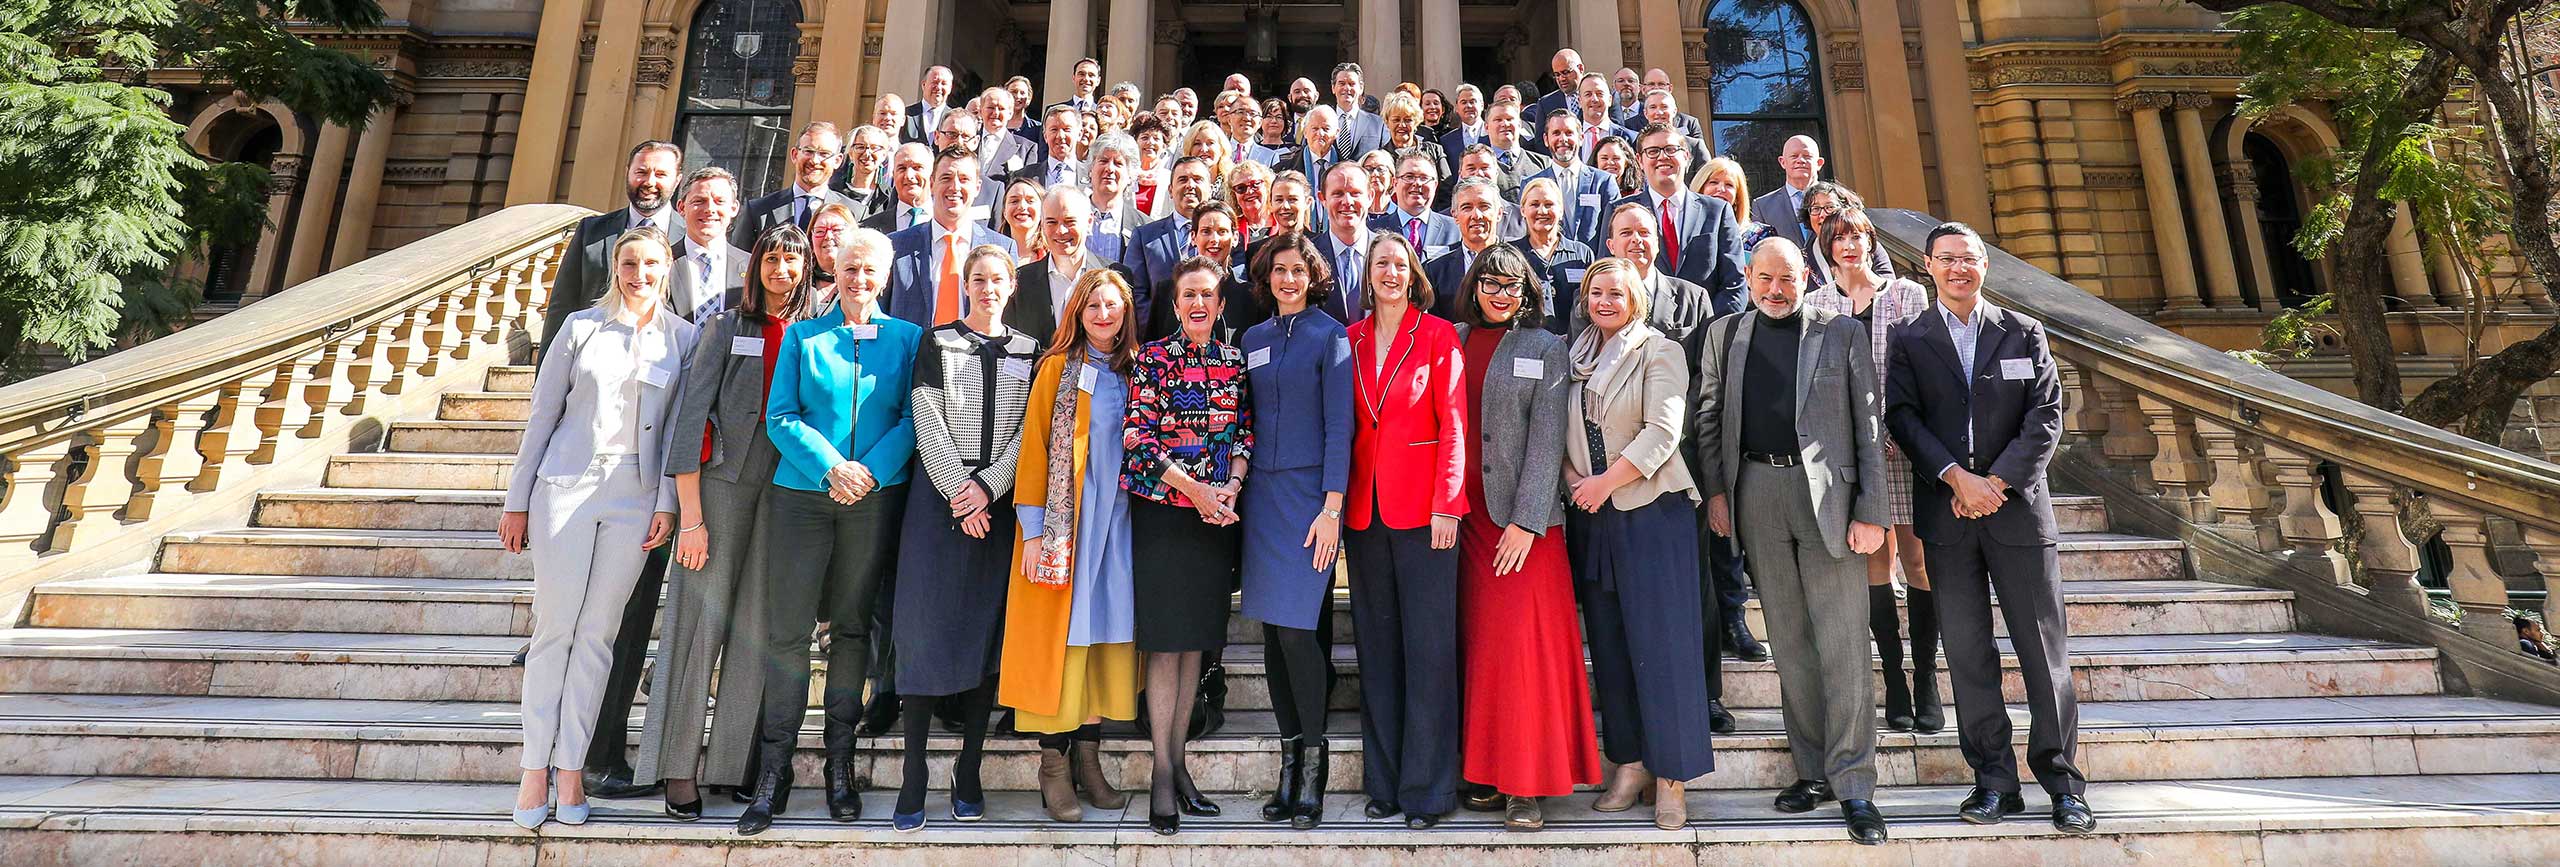 Penrith Mayor John Thain joined over 30 metropolitan councils, government organisations, businesses, and community leaders at Sydney Town Hall to launch The Sydney Resilience Strategy. (Photo by Katherine Griffiths, City of Sydney)